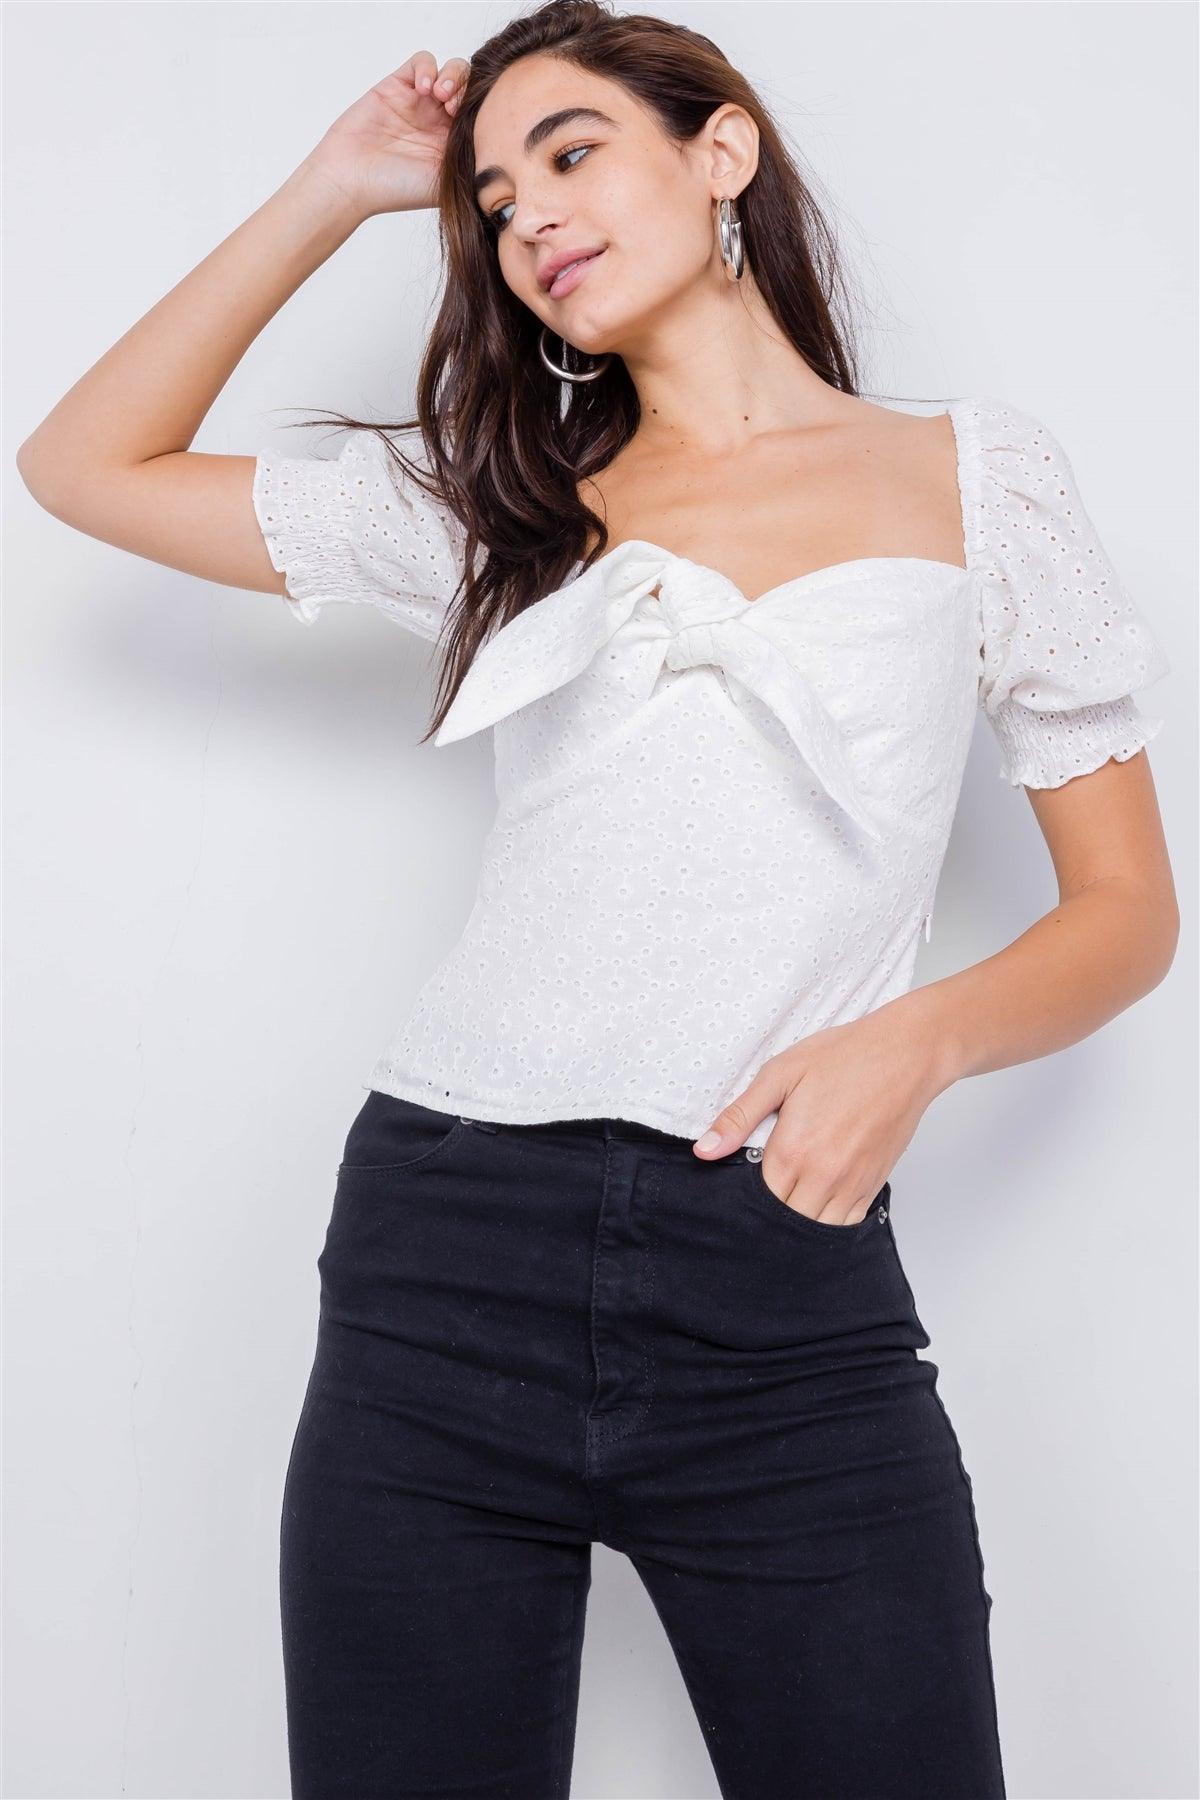 Off-White Floral Eyelet Office Chic Square Neck Front Bow Top /4-2-1